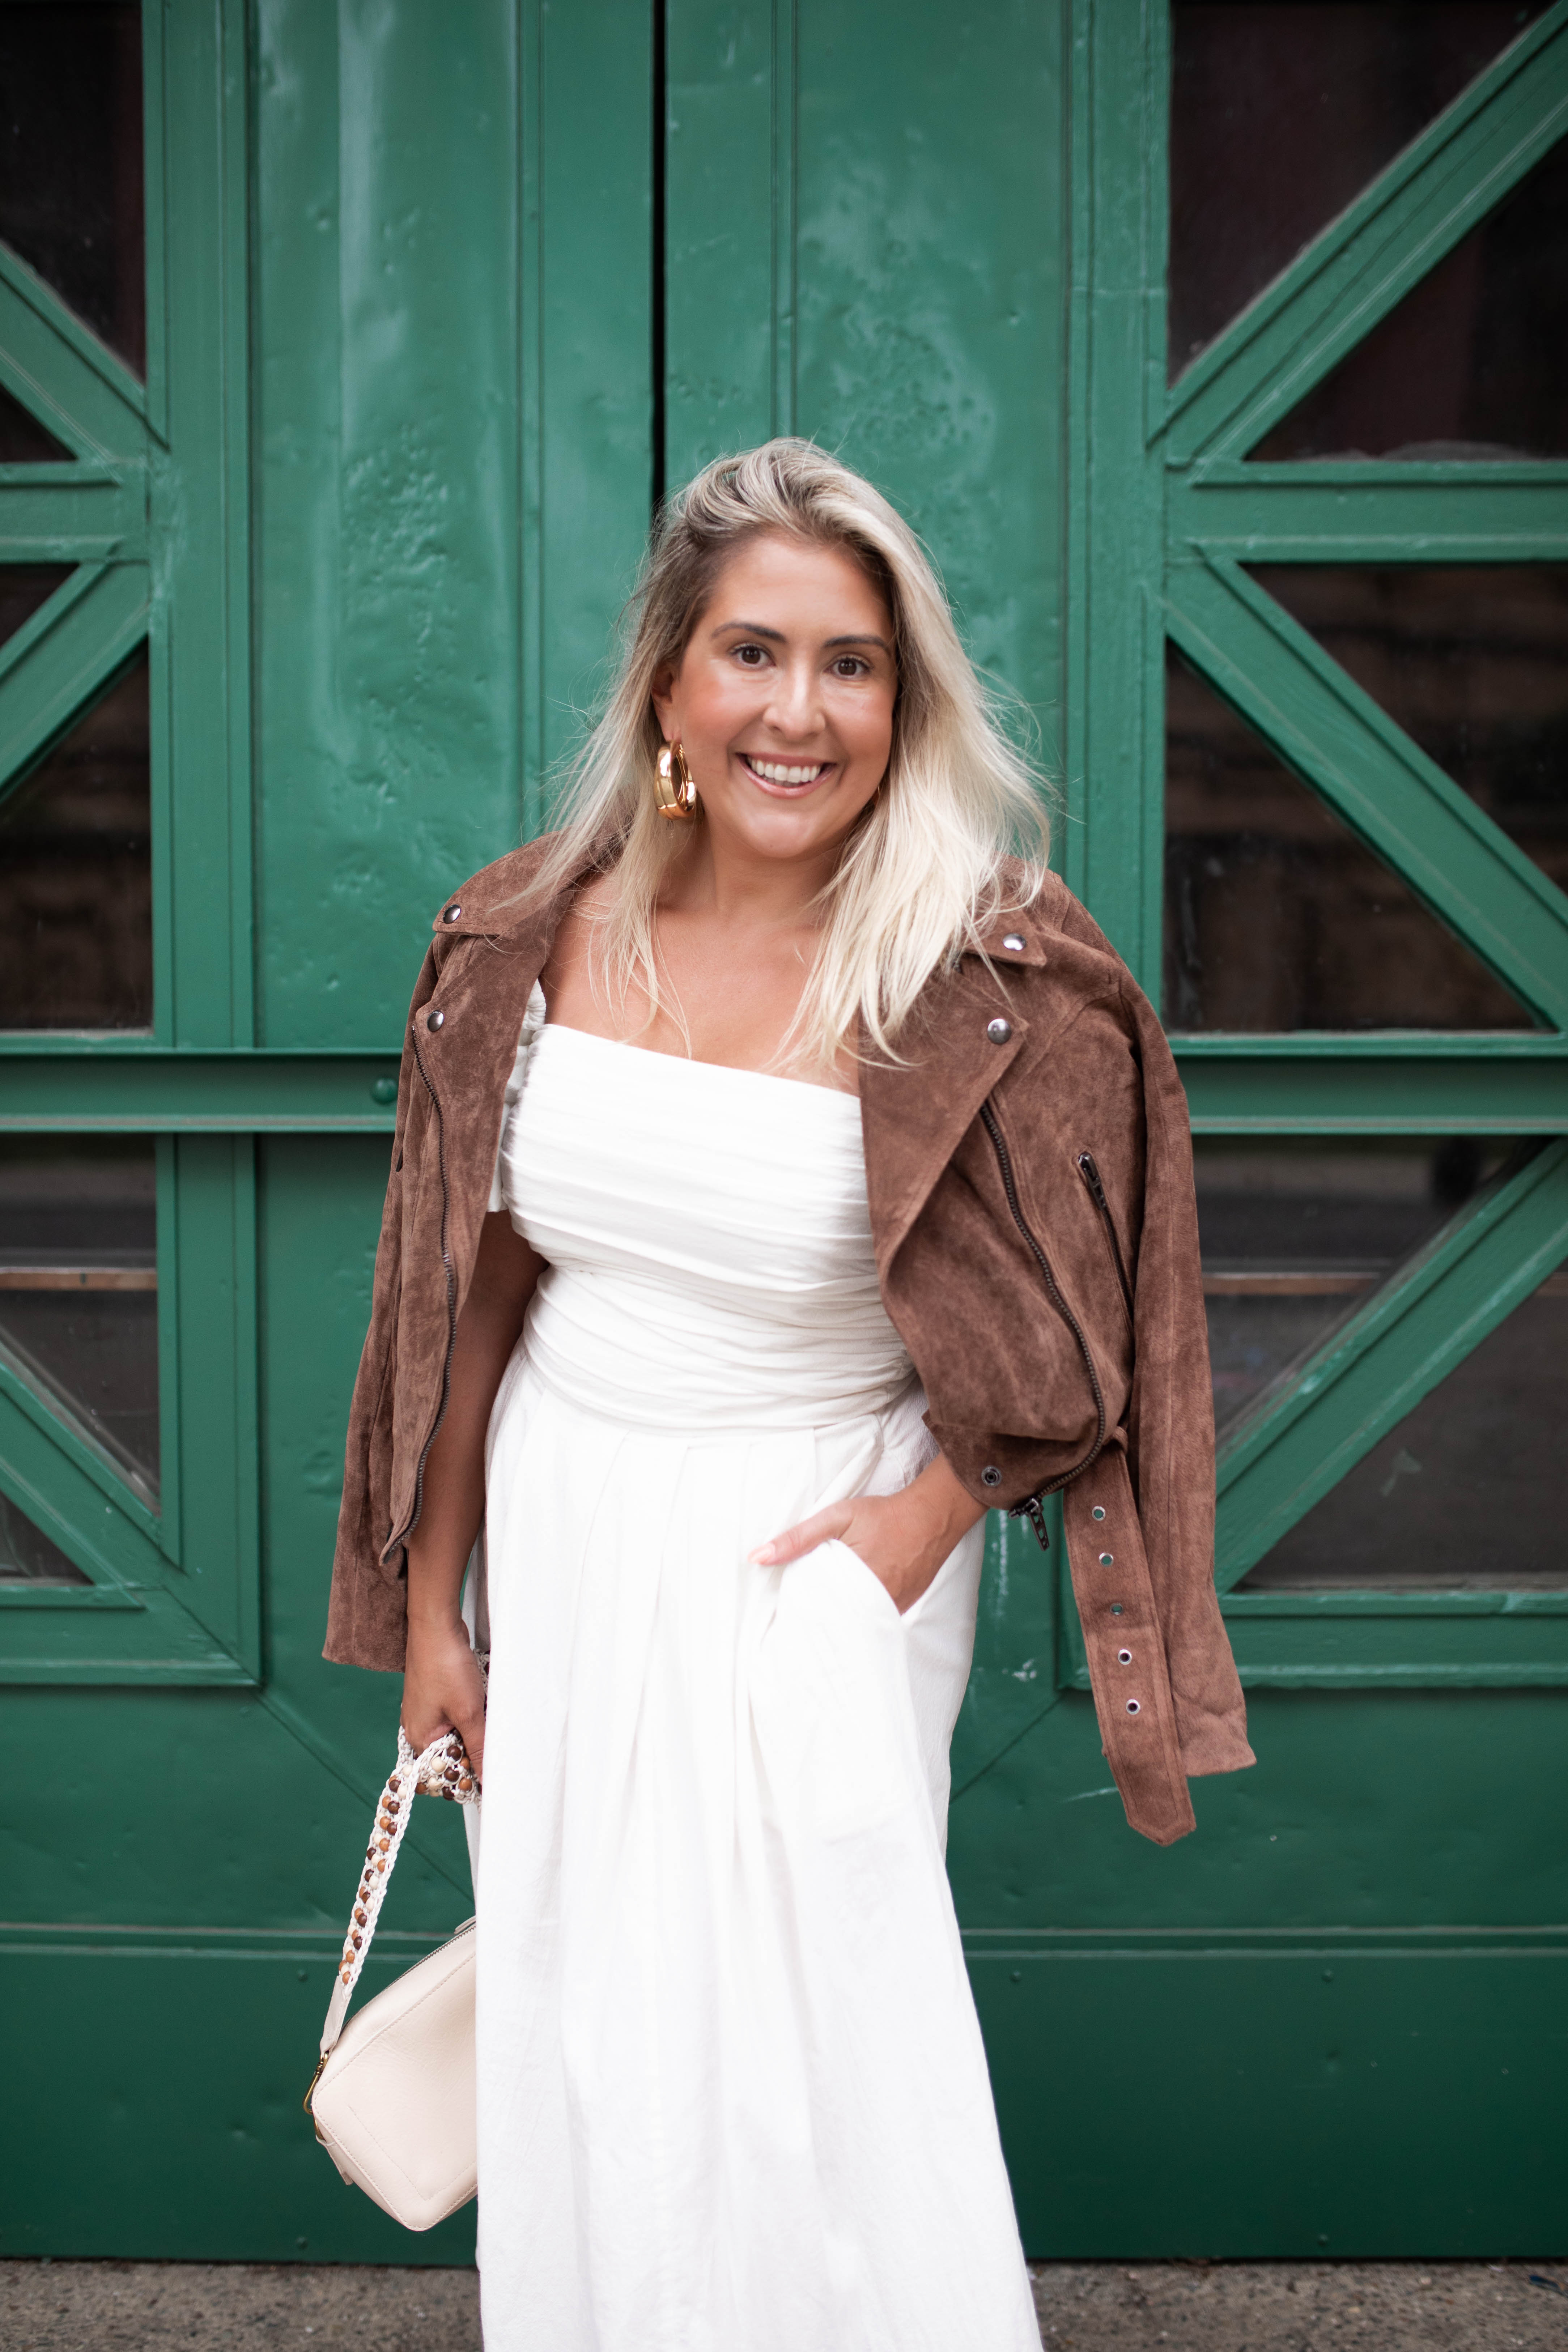 San Francisco blogger Katwalksf styles the Free People Ain't She a Beaut Puff Sleeve Ruched Dress with a brown suede jacket.